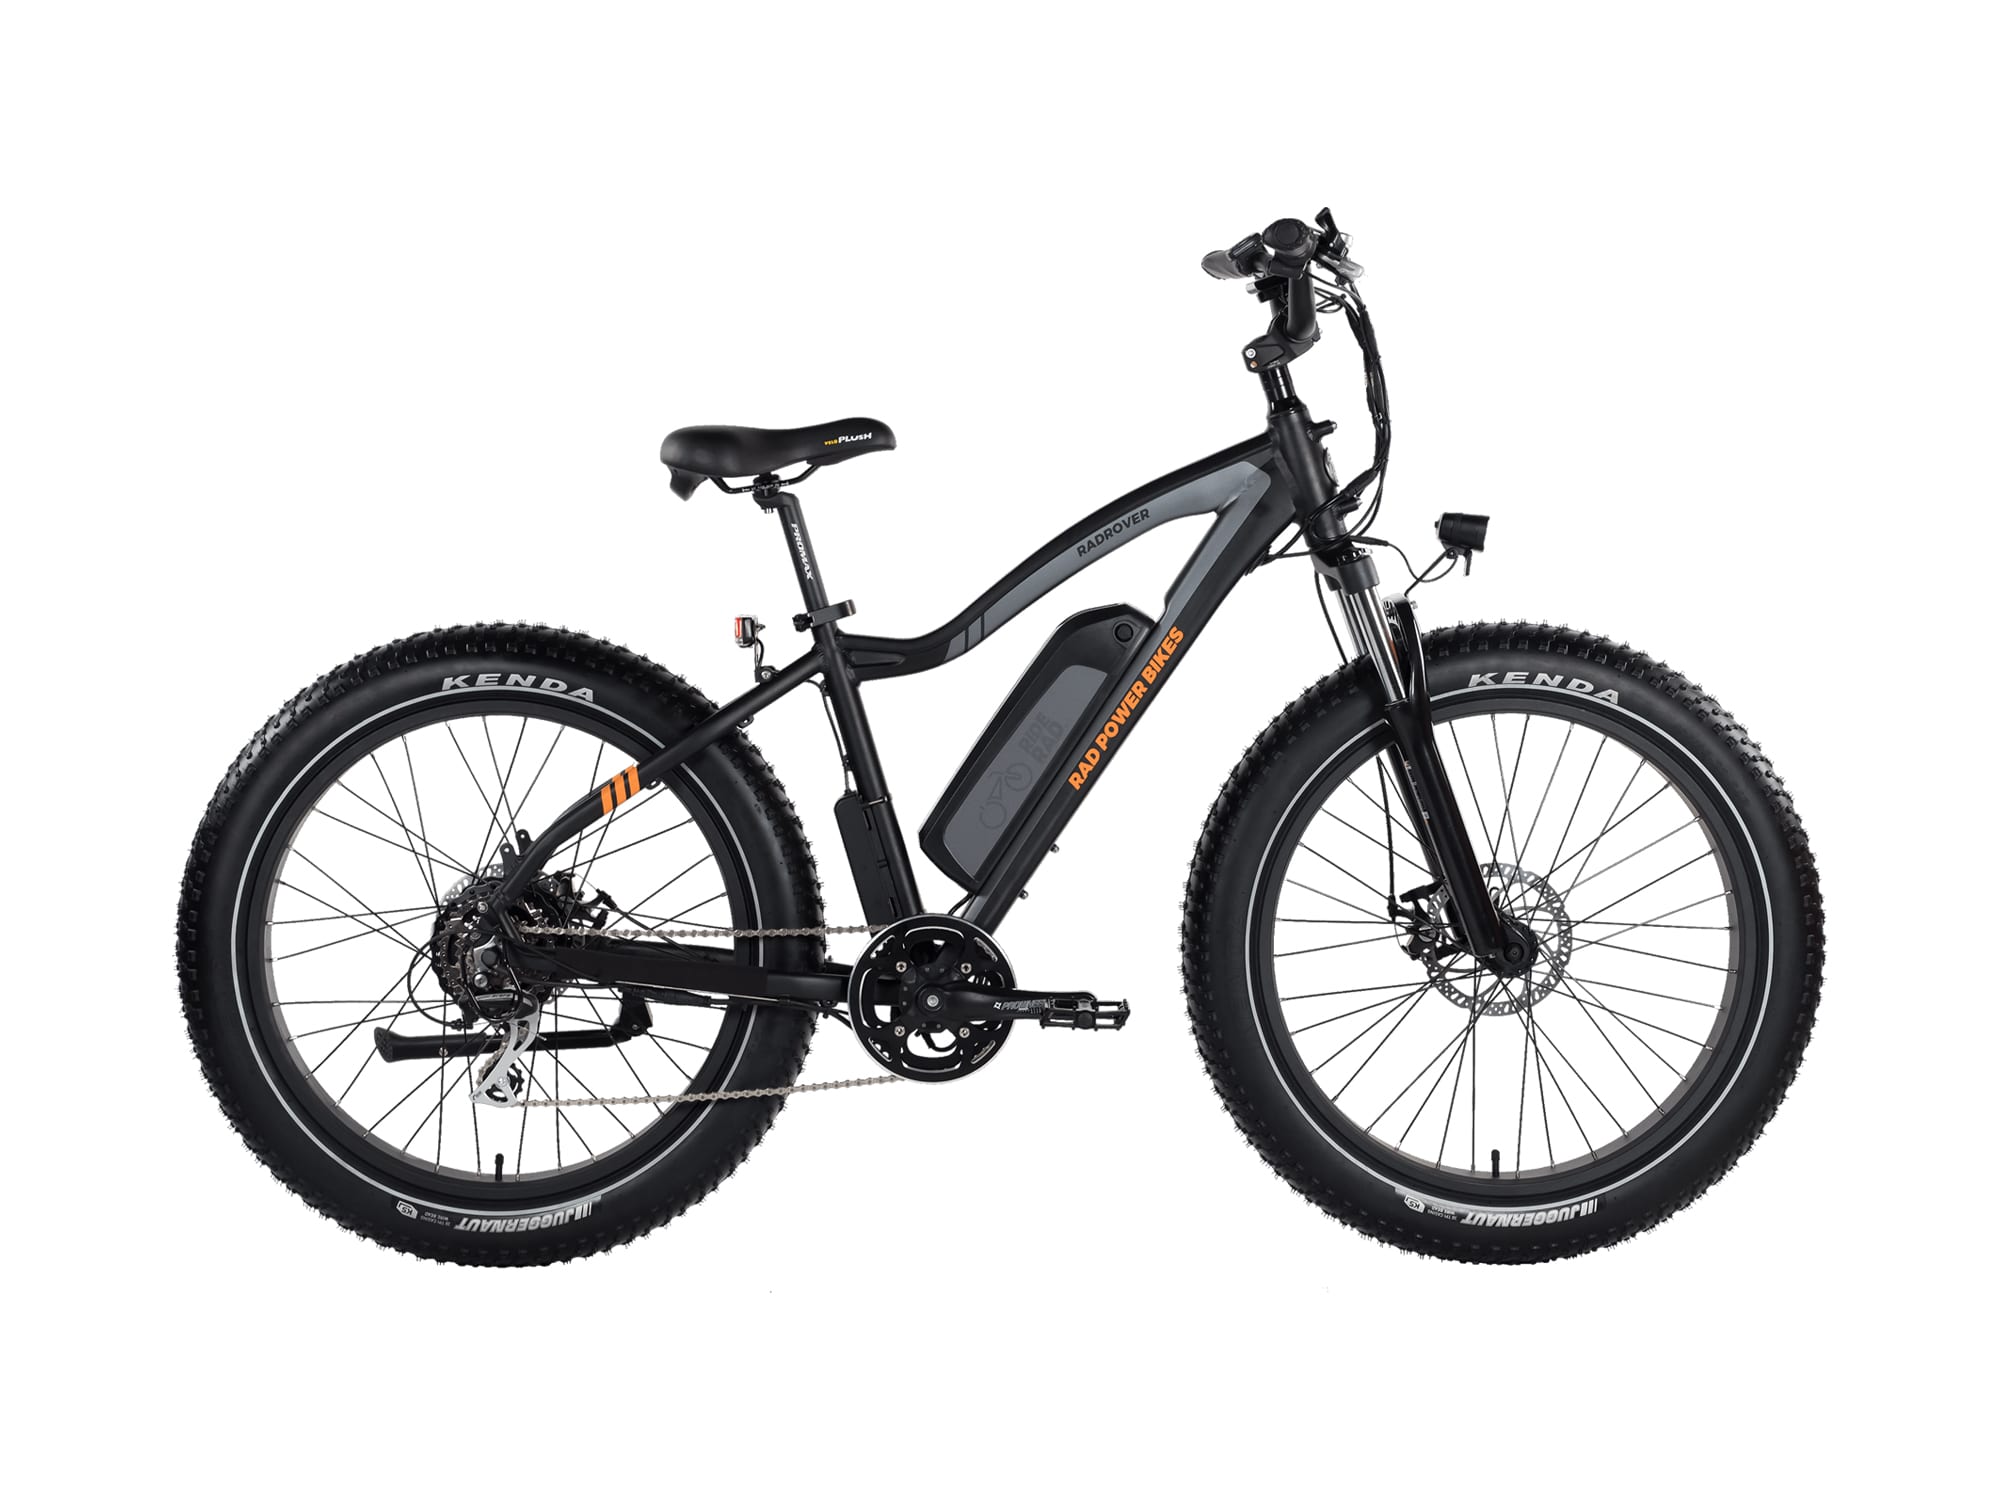 radrover electric fat bike review